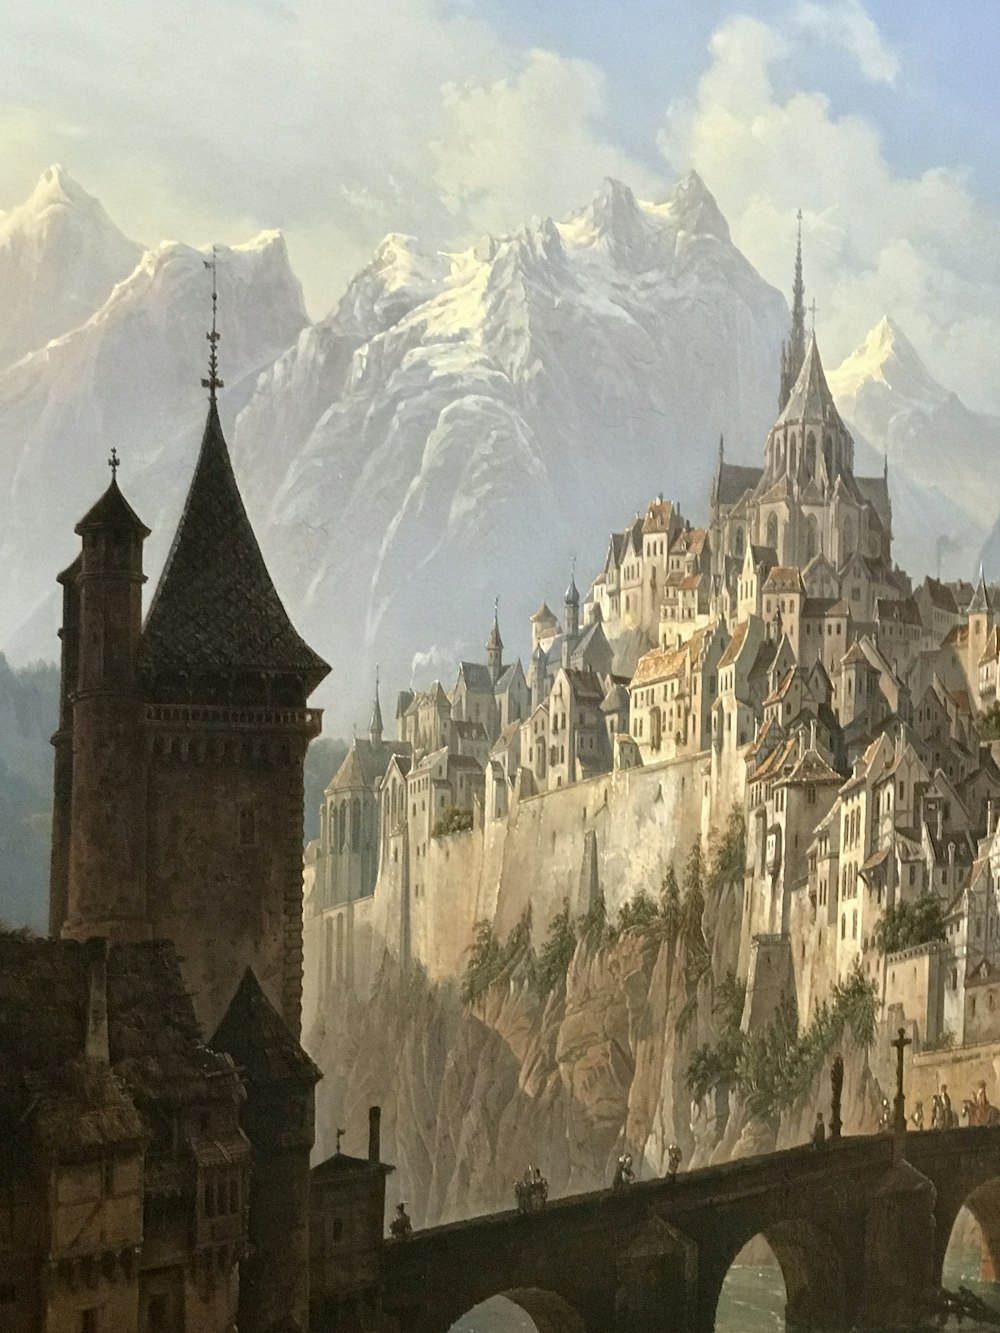 brown and gray castle near mountain